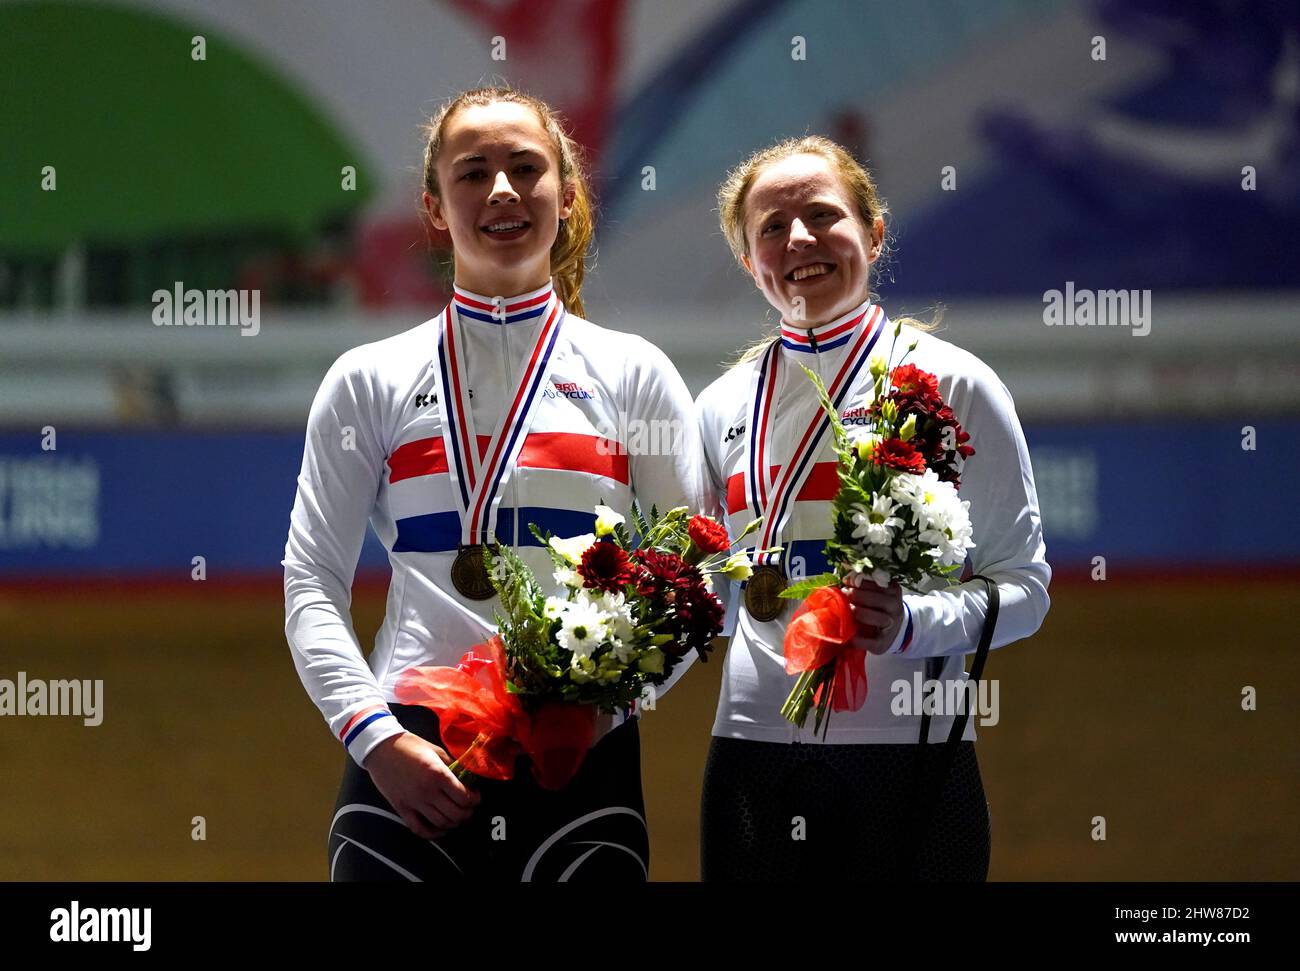 Lora Fachie MBE (right) and pilot Georgia Holt celebrate with their medals after winning the Tandem Sprint Championship during day two of the HSBC UK National Track Championships at the Geraint Thomas National Velodrome, Newport. Stock Photo